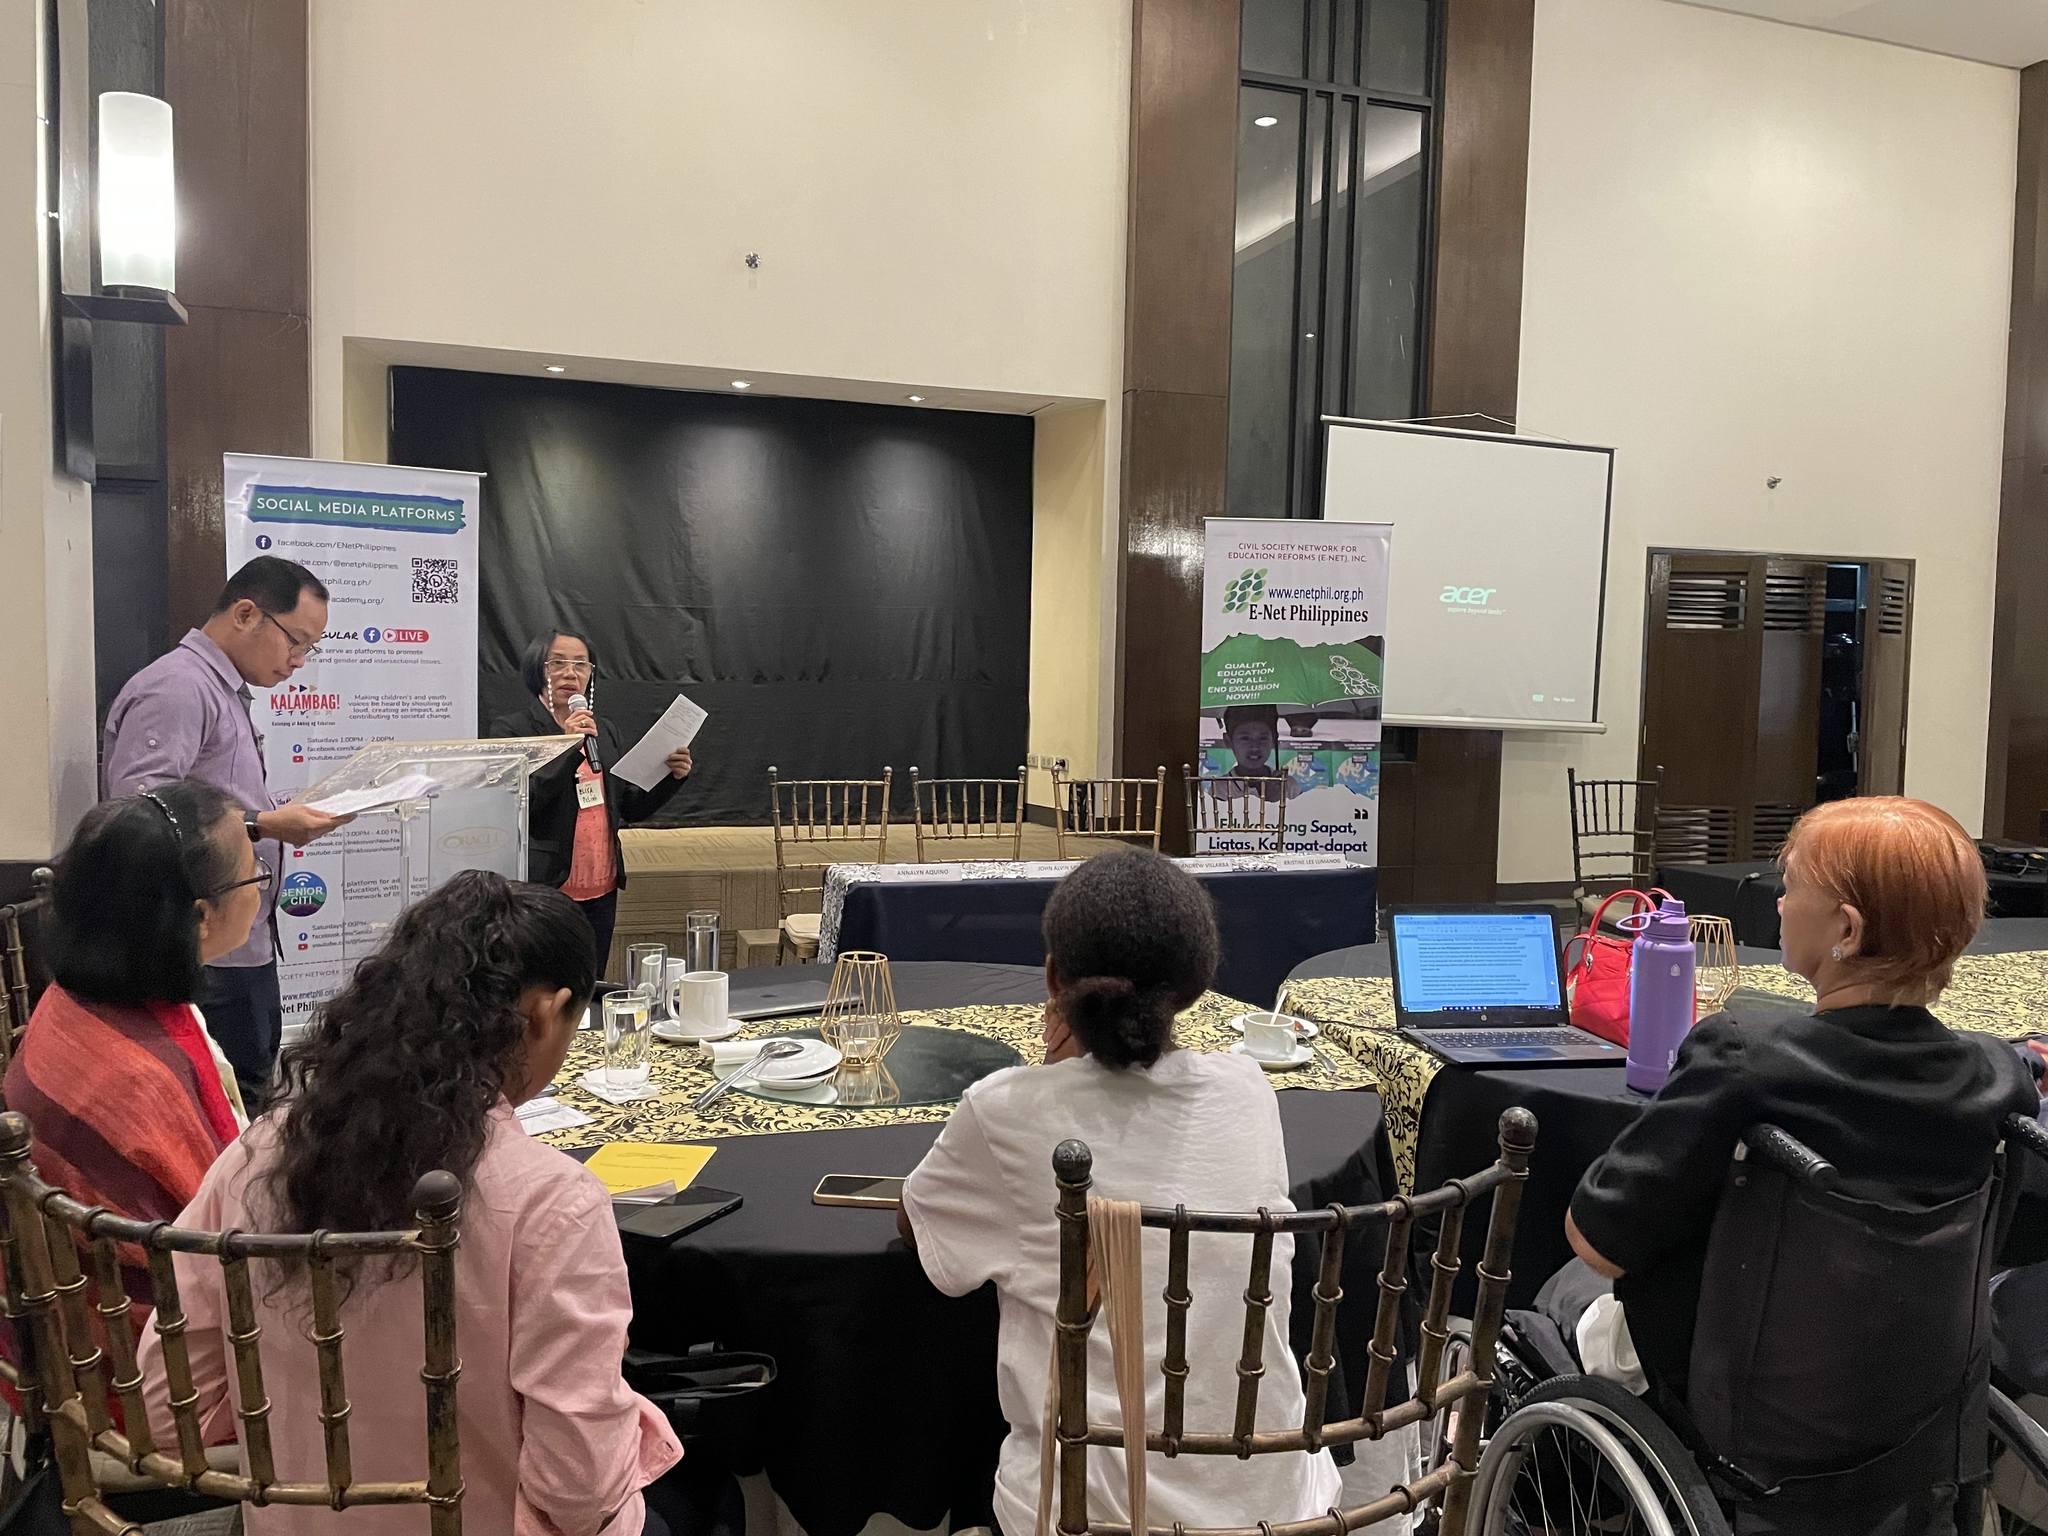 Read more about the article E-Net Philippines held a national training to promote inclusive and gender-responsive education policy and budget advocacy.